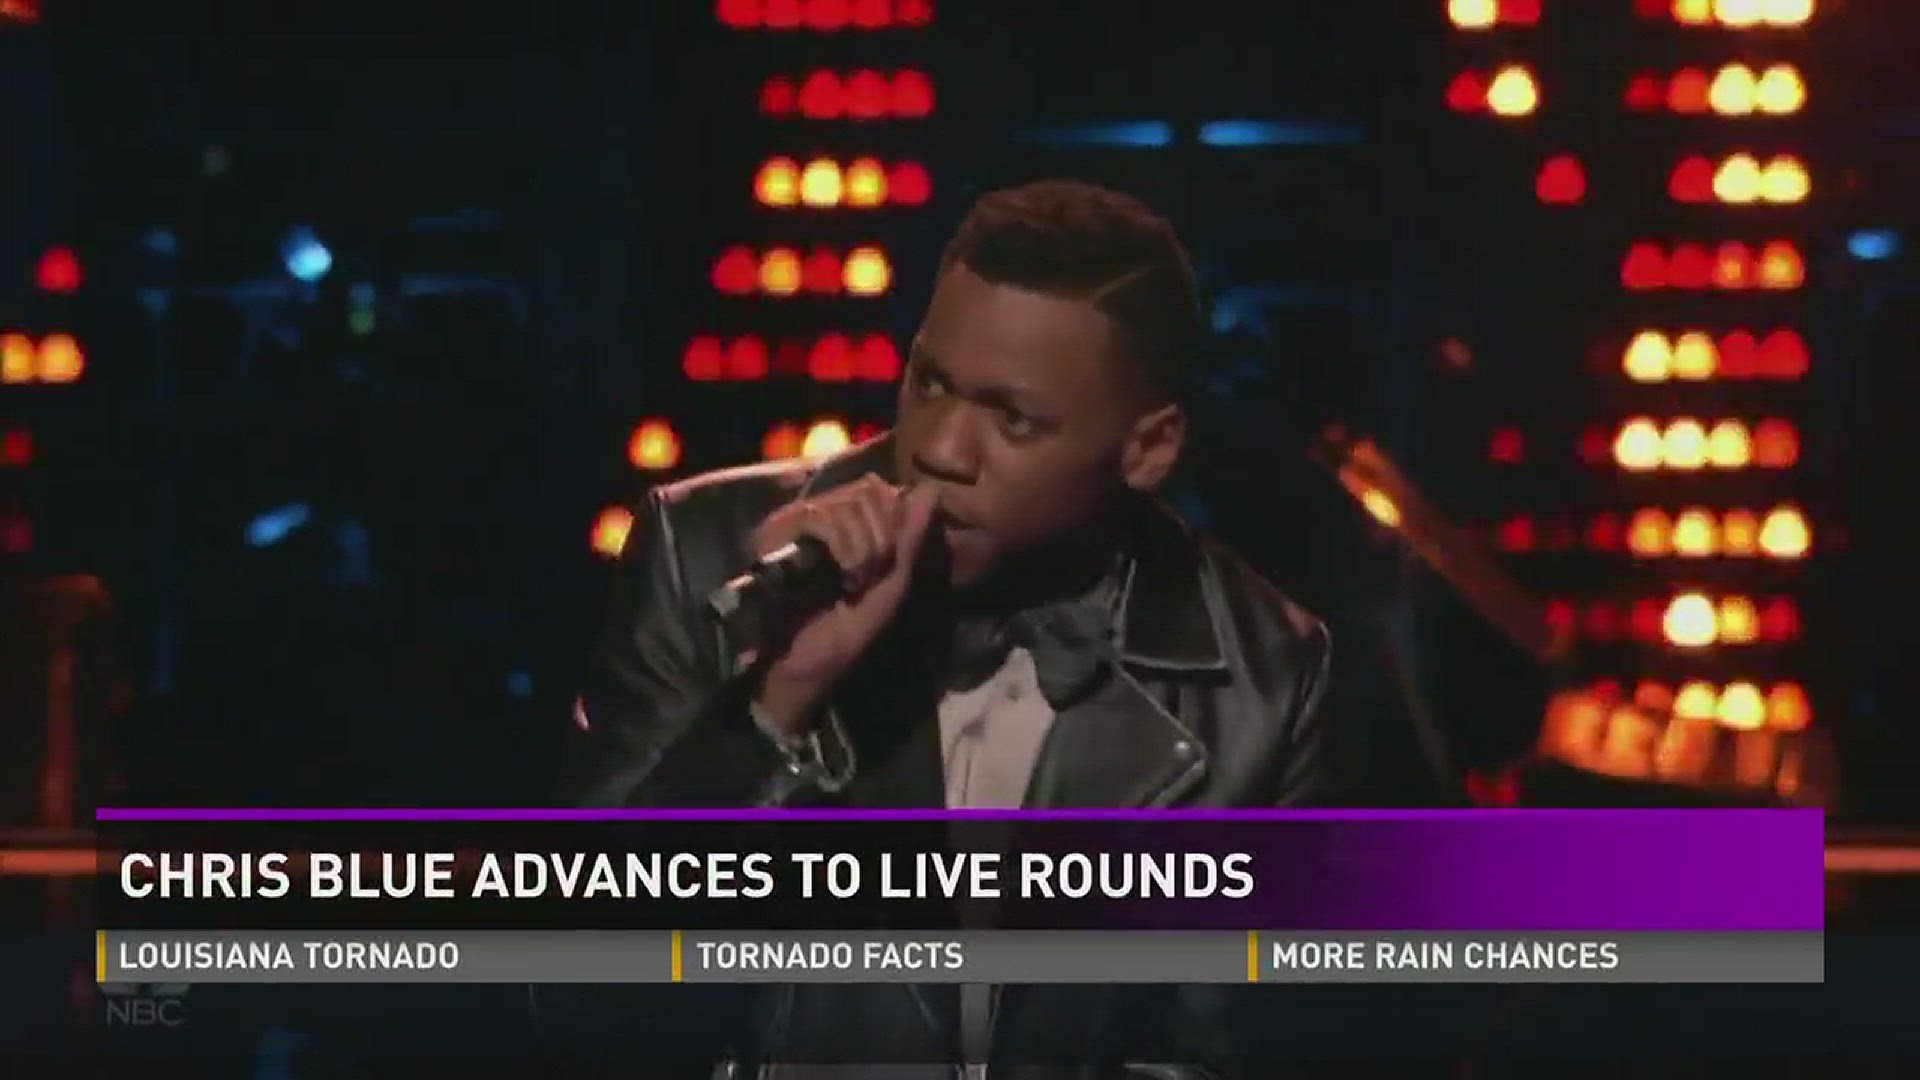 April 3, 2017: Chris Blue is going to the live rounds of NBC's The Voice! The Knoxville singer is making his mark on the show and in his home community.